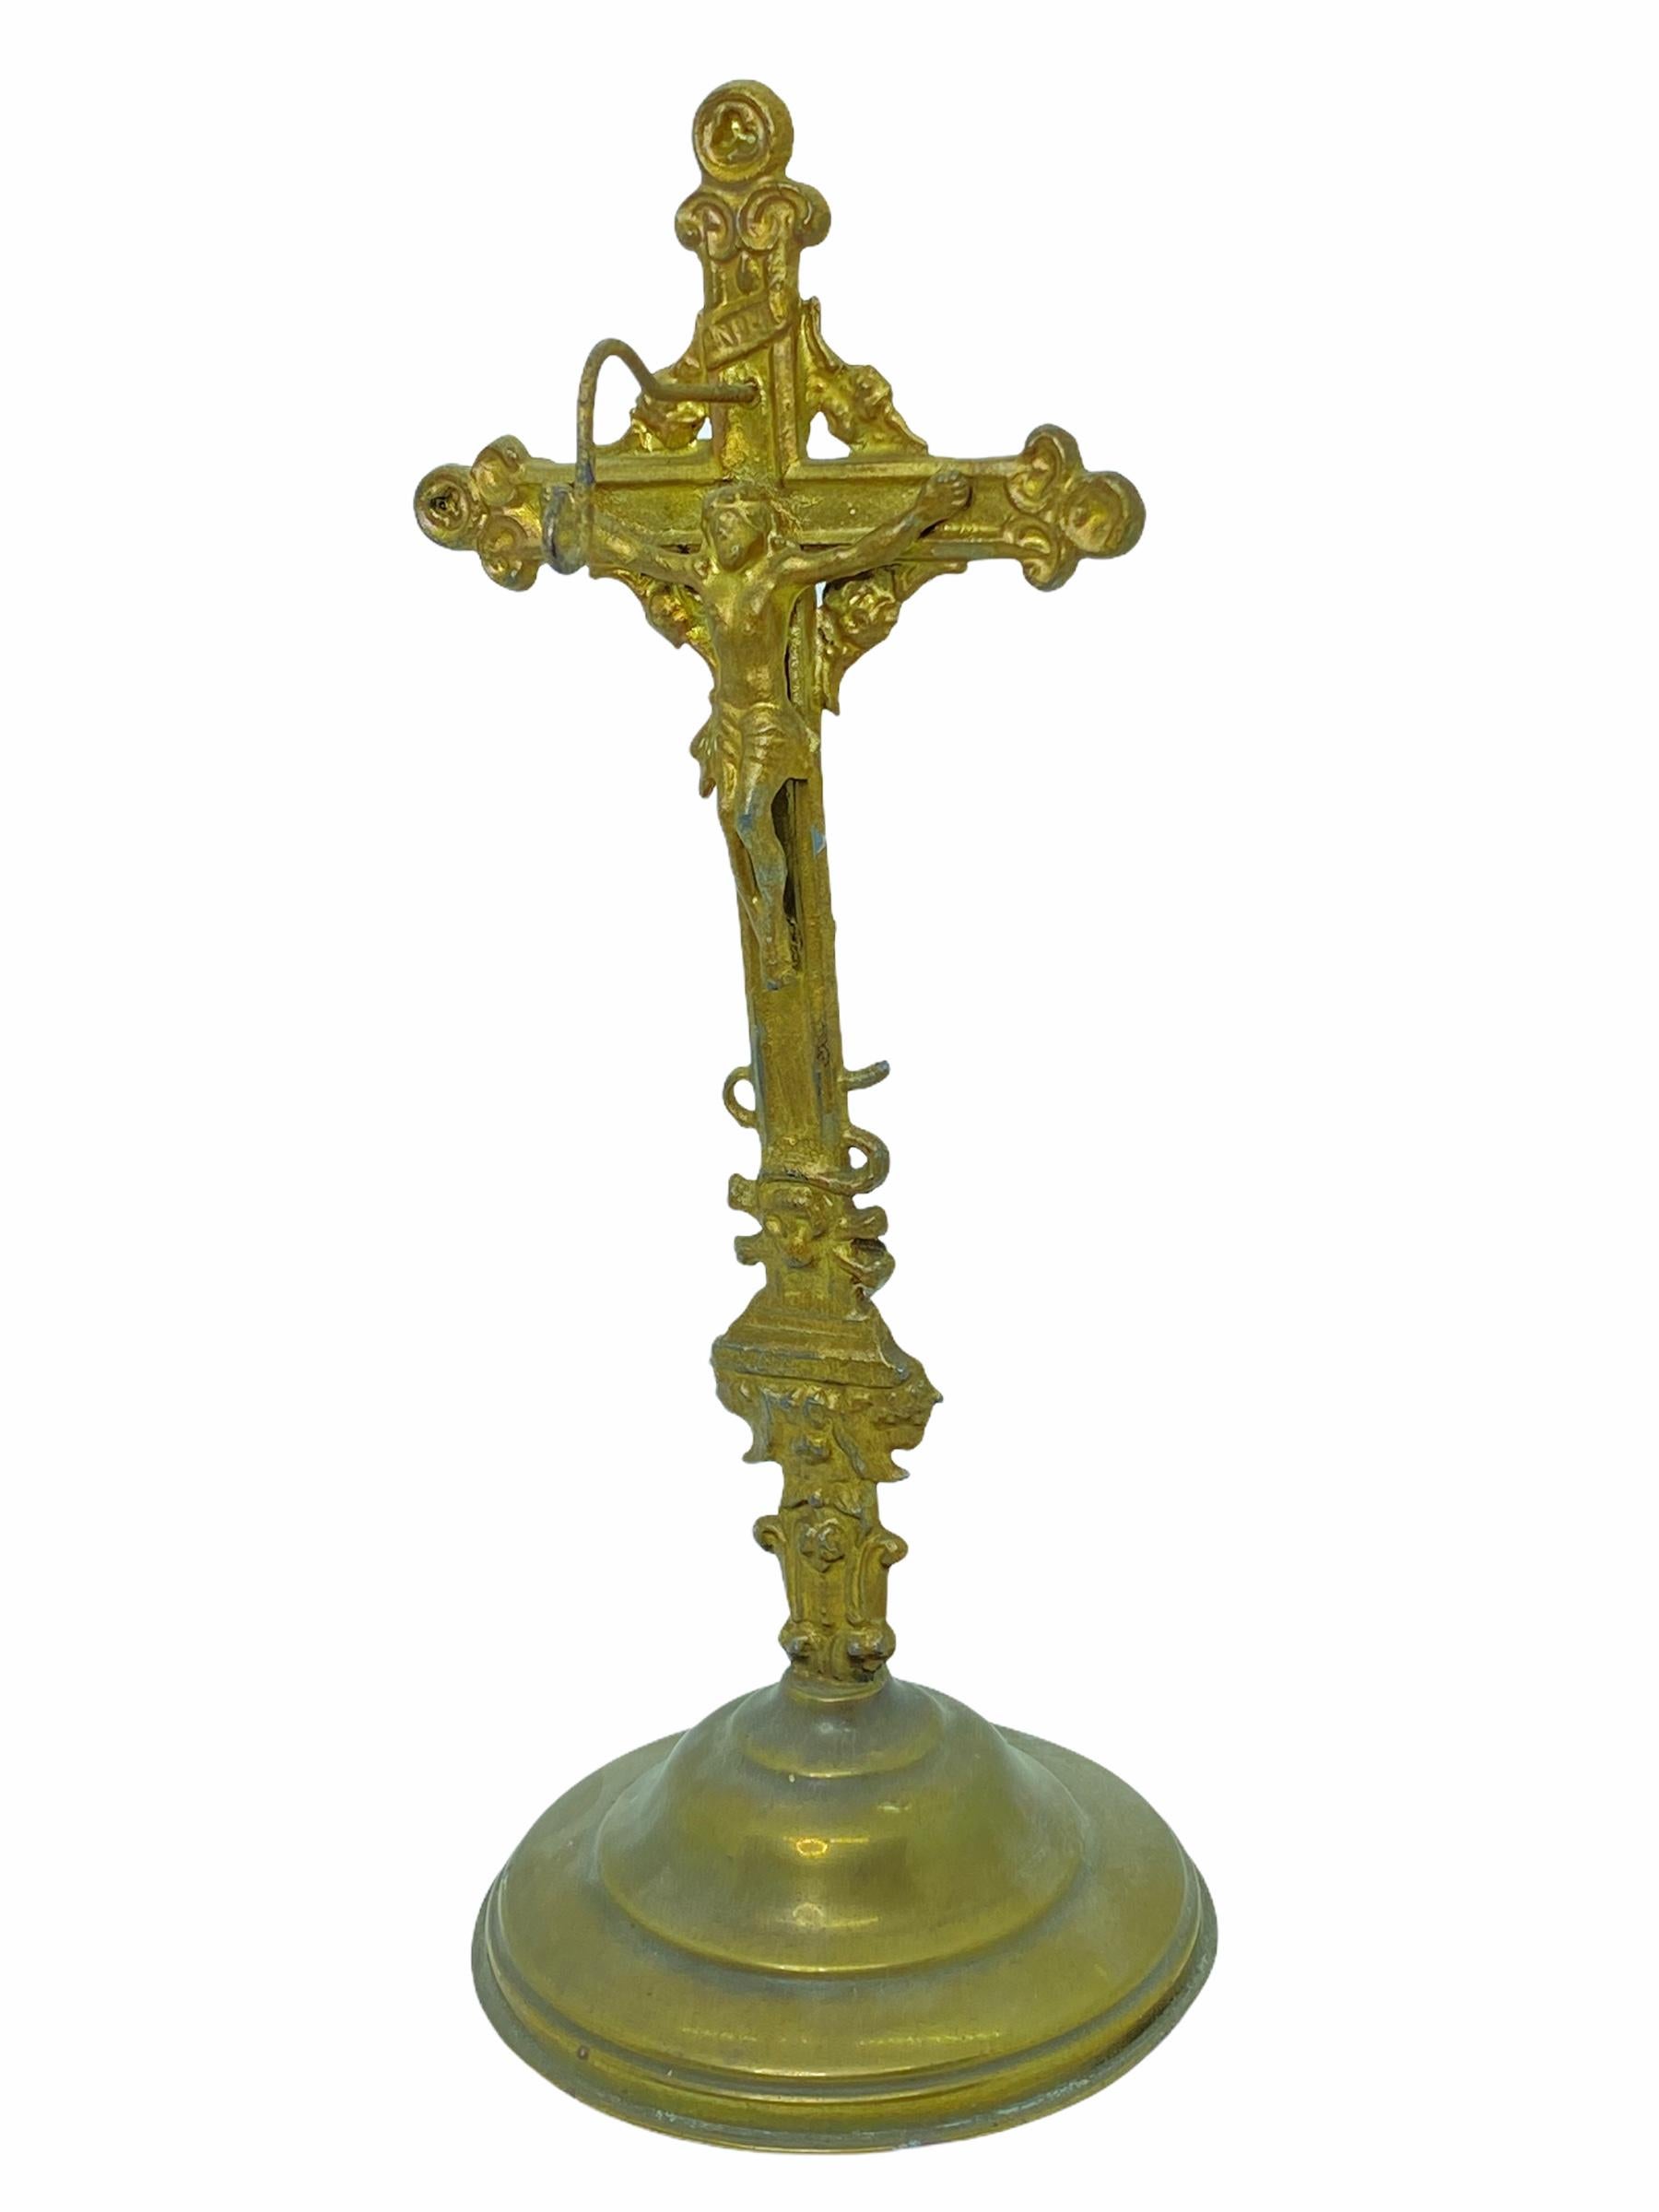 This antique Crucifix stand is probably made for display your rosary, it was found like this with the rosary hanging on it. stand is made of gilt metal and comes with this beautiful Rosary. The Rosary is approx. 18 inches in length, that making it